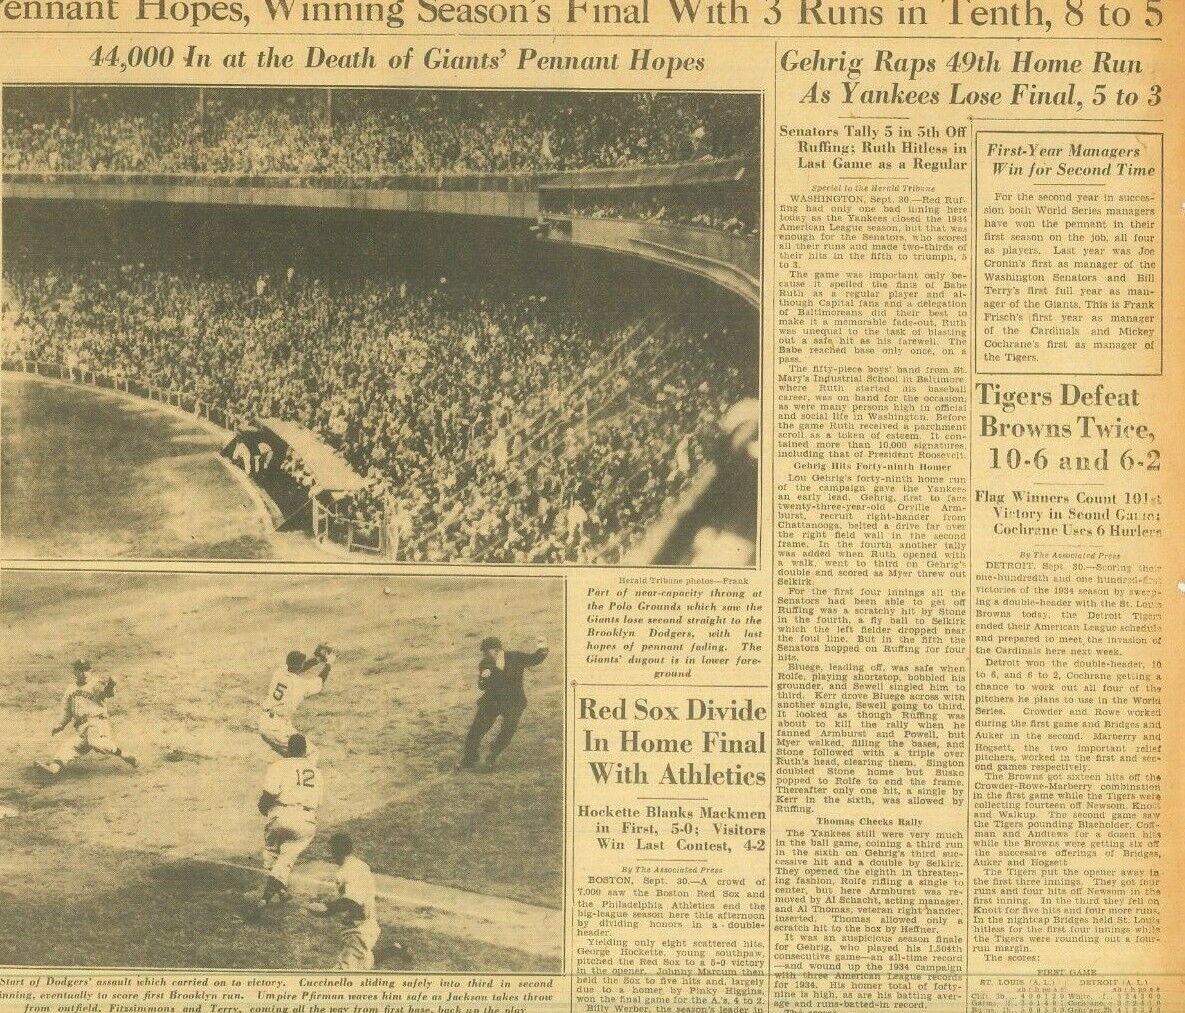 Hitless Babe Ruth Final Game for New York Yankees Gehrig Reigns October 1 1934